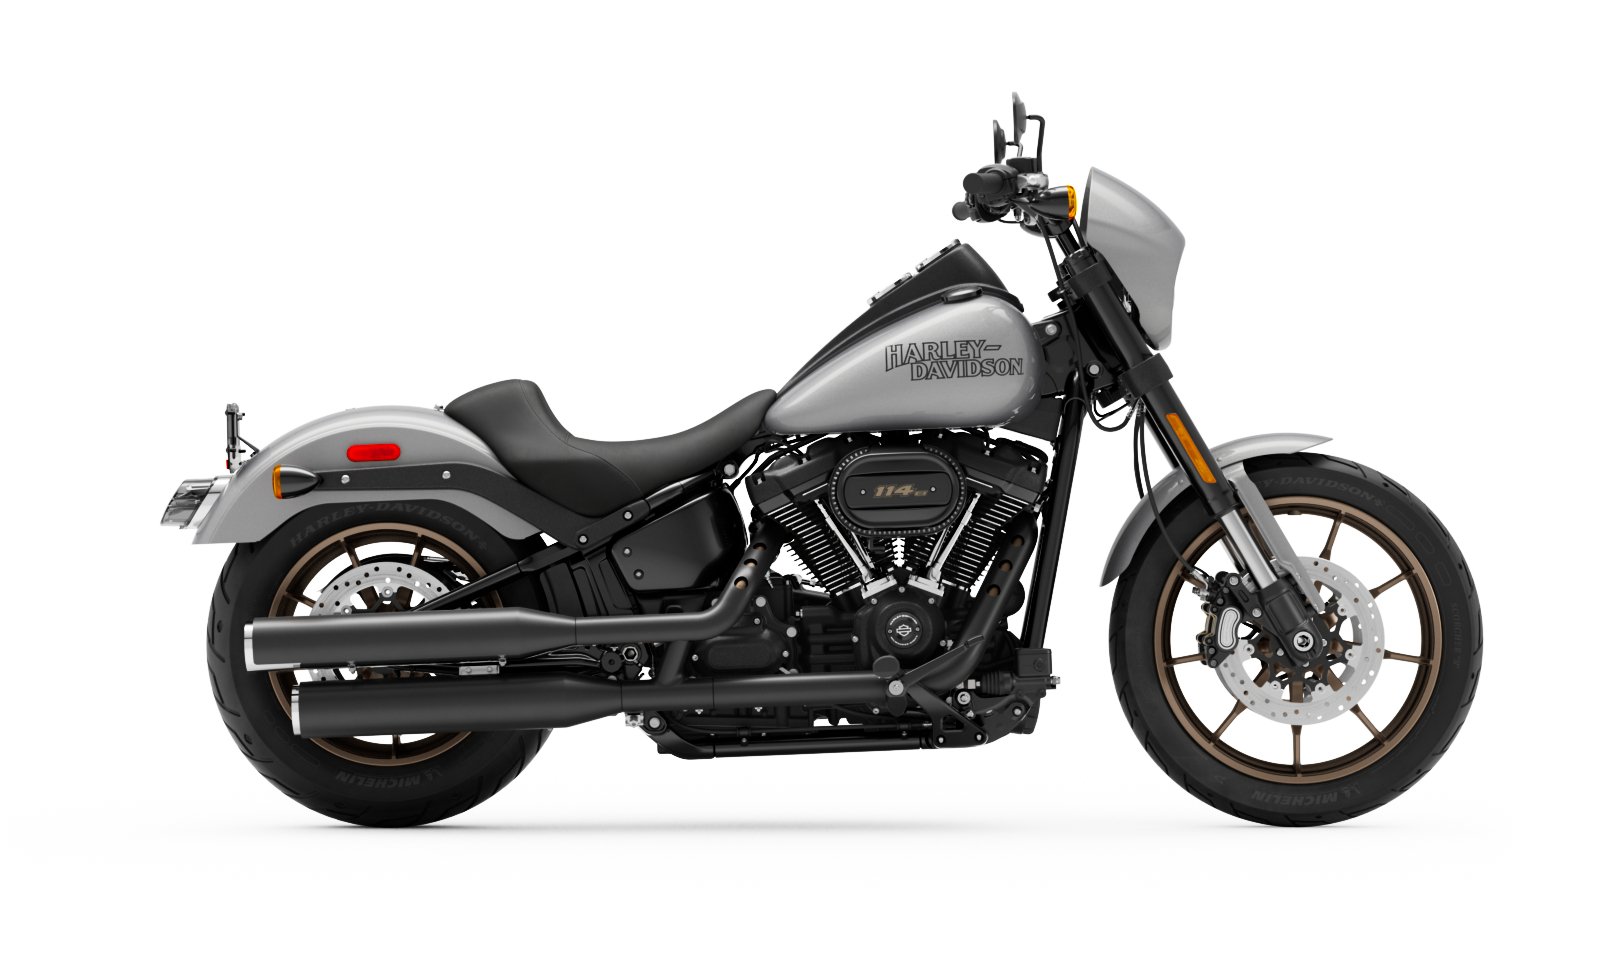 2020 Low Rider S Motorcycle Harley Davidson Asia Pacific Markets